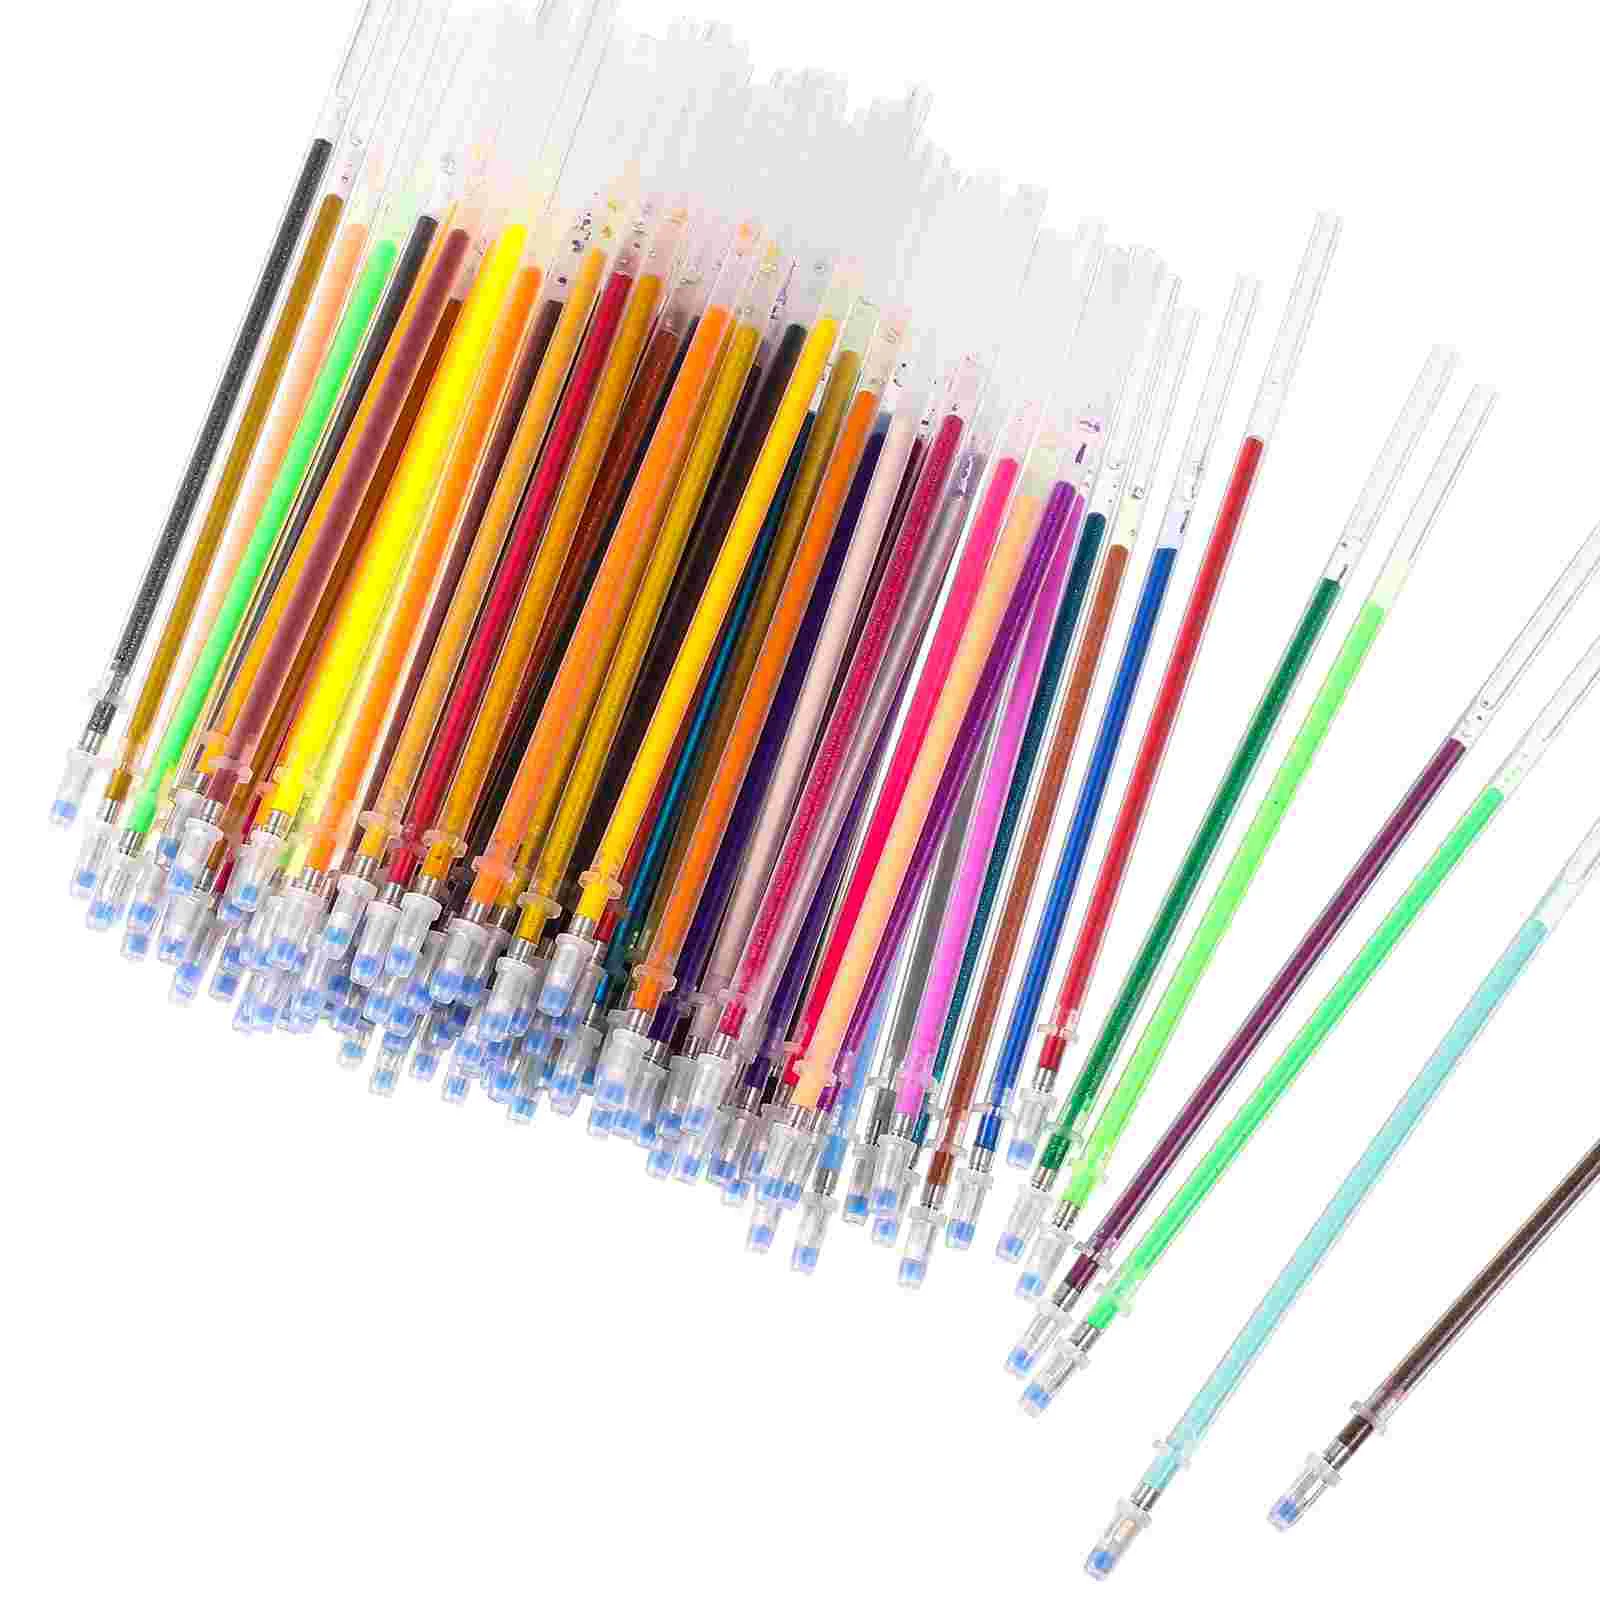 

Colorful Gel Pen Refills Bullet Pen Refill Student Stationery Office Supplies for Doodling Drawing (Mixed Color)